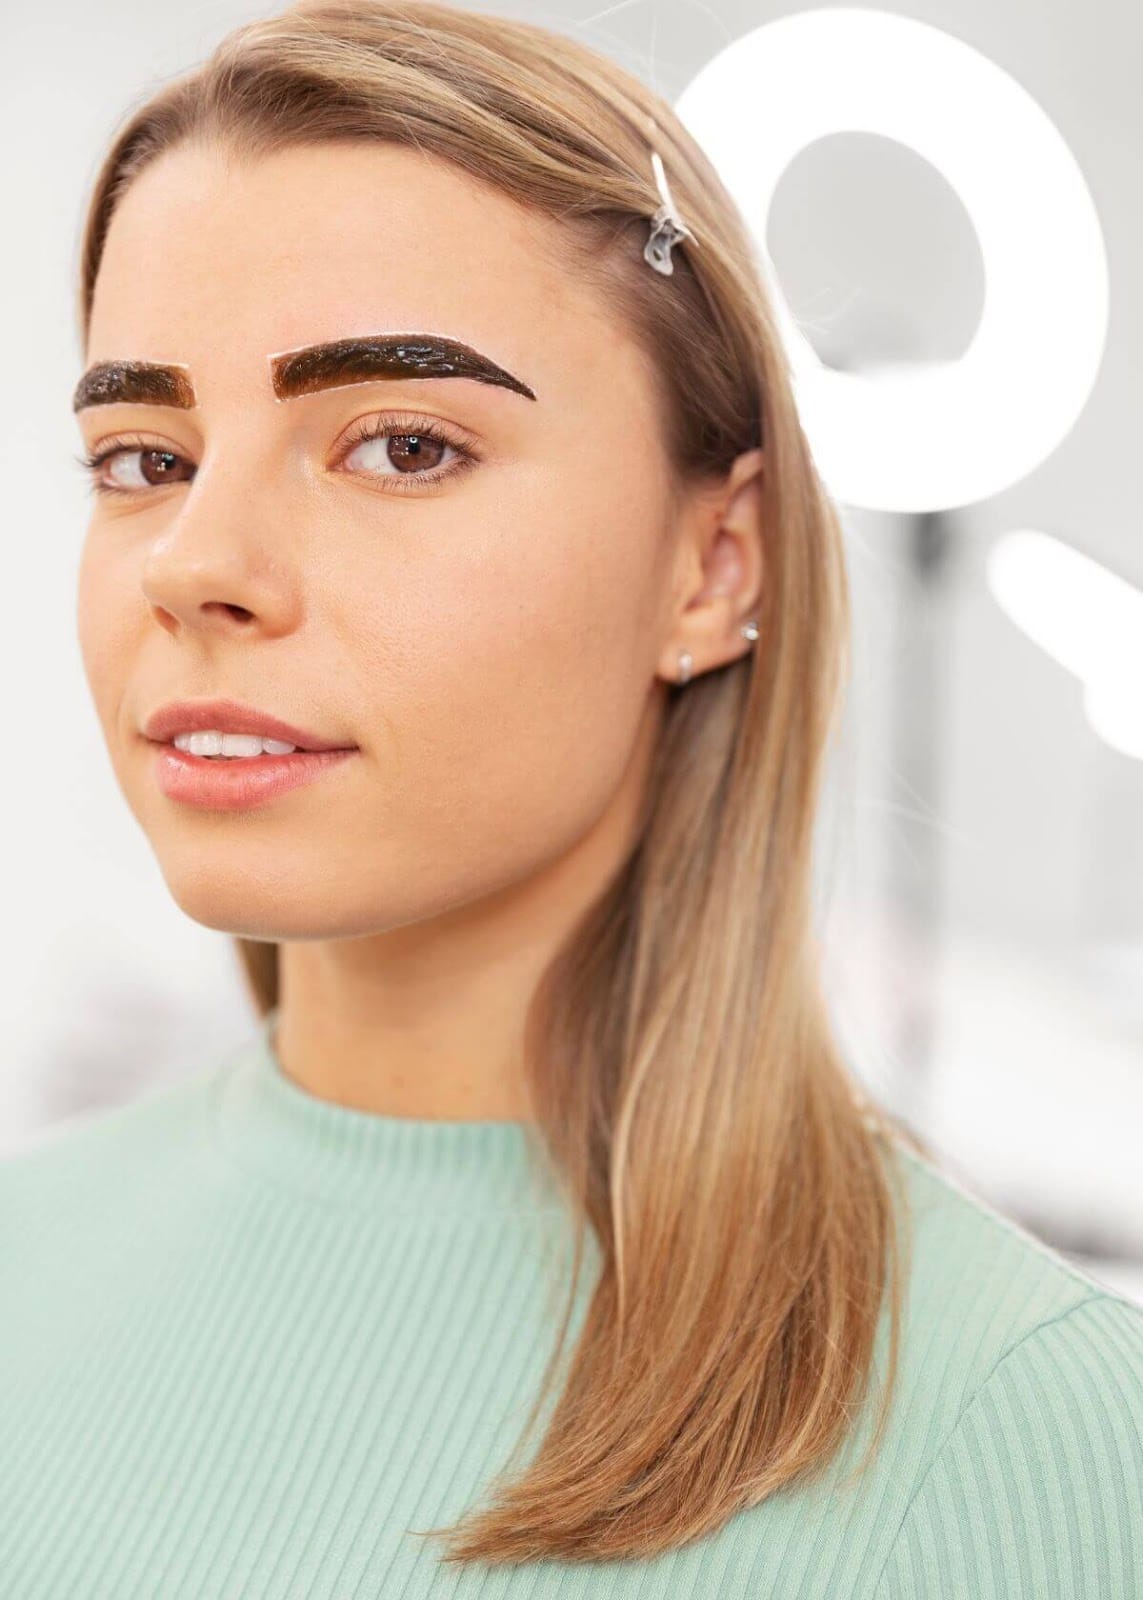  How to reduce eyebrow swelling after a wax?